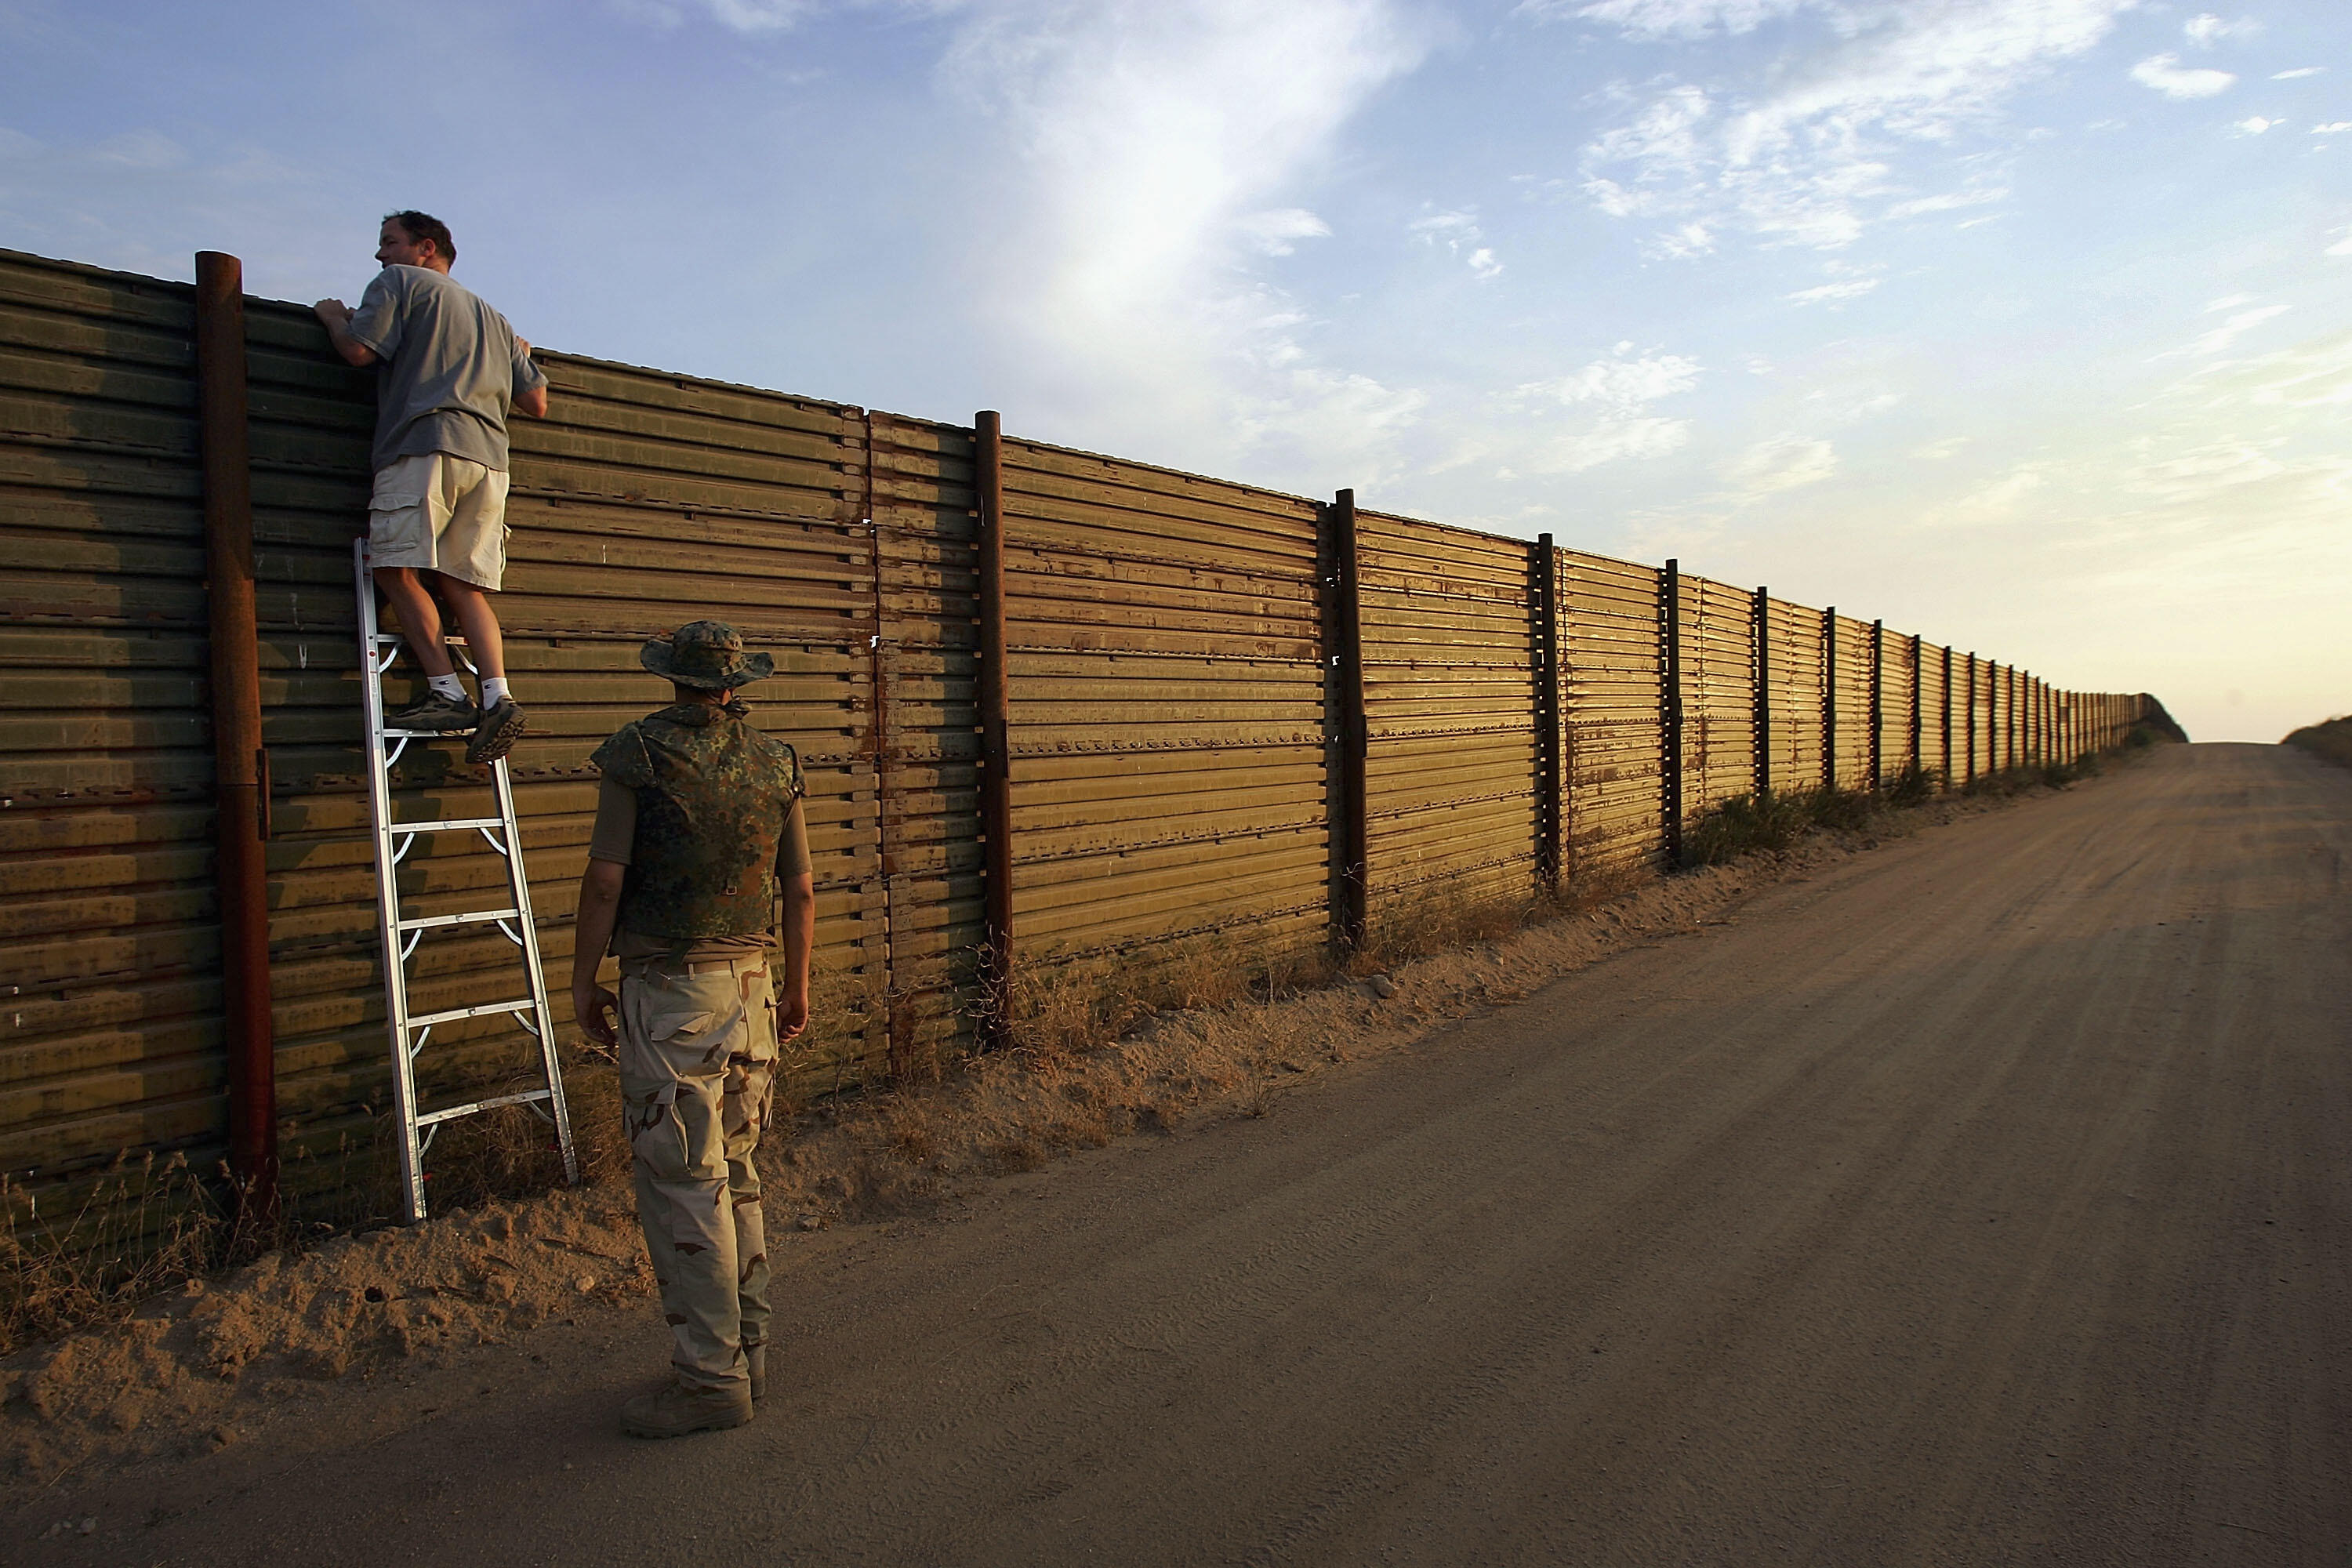 CAMPO, CA - JULY 19:  Volunteers look over the US-Mexico border fence to see how illegal border crossers may jump the fence before going on the nightly patrol by citizen volunteers searching for people crossing into the US illegally from Mexico on July 19